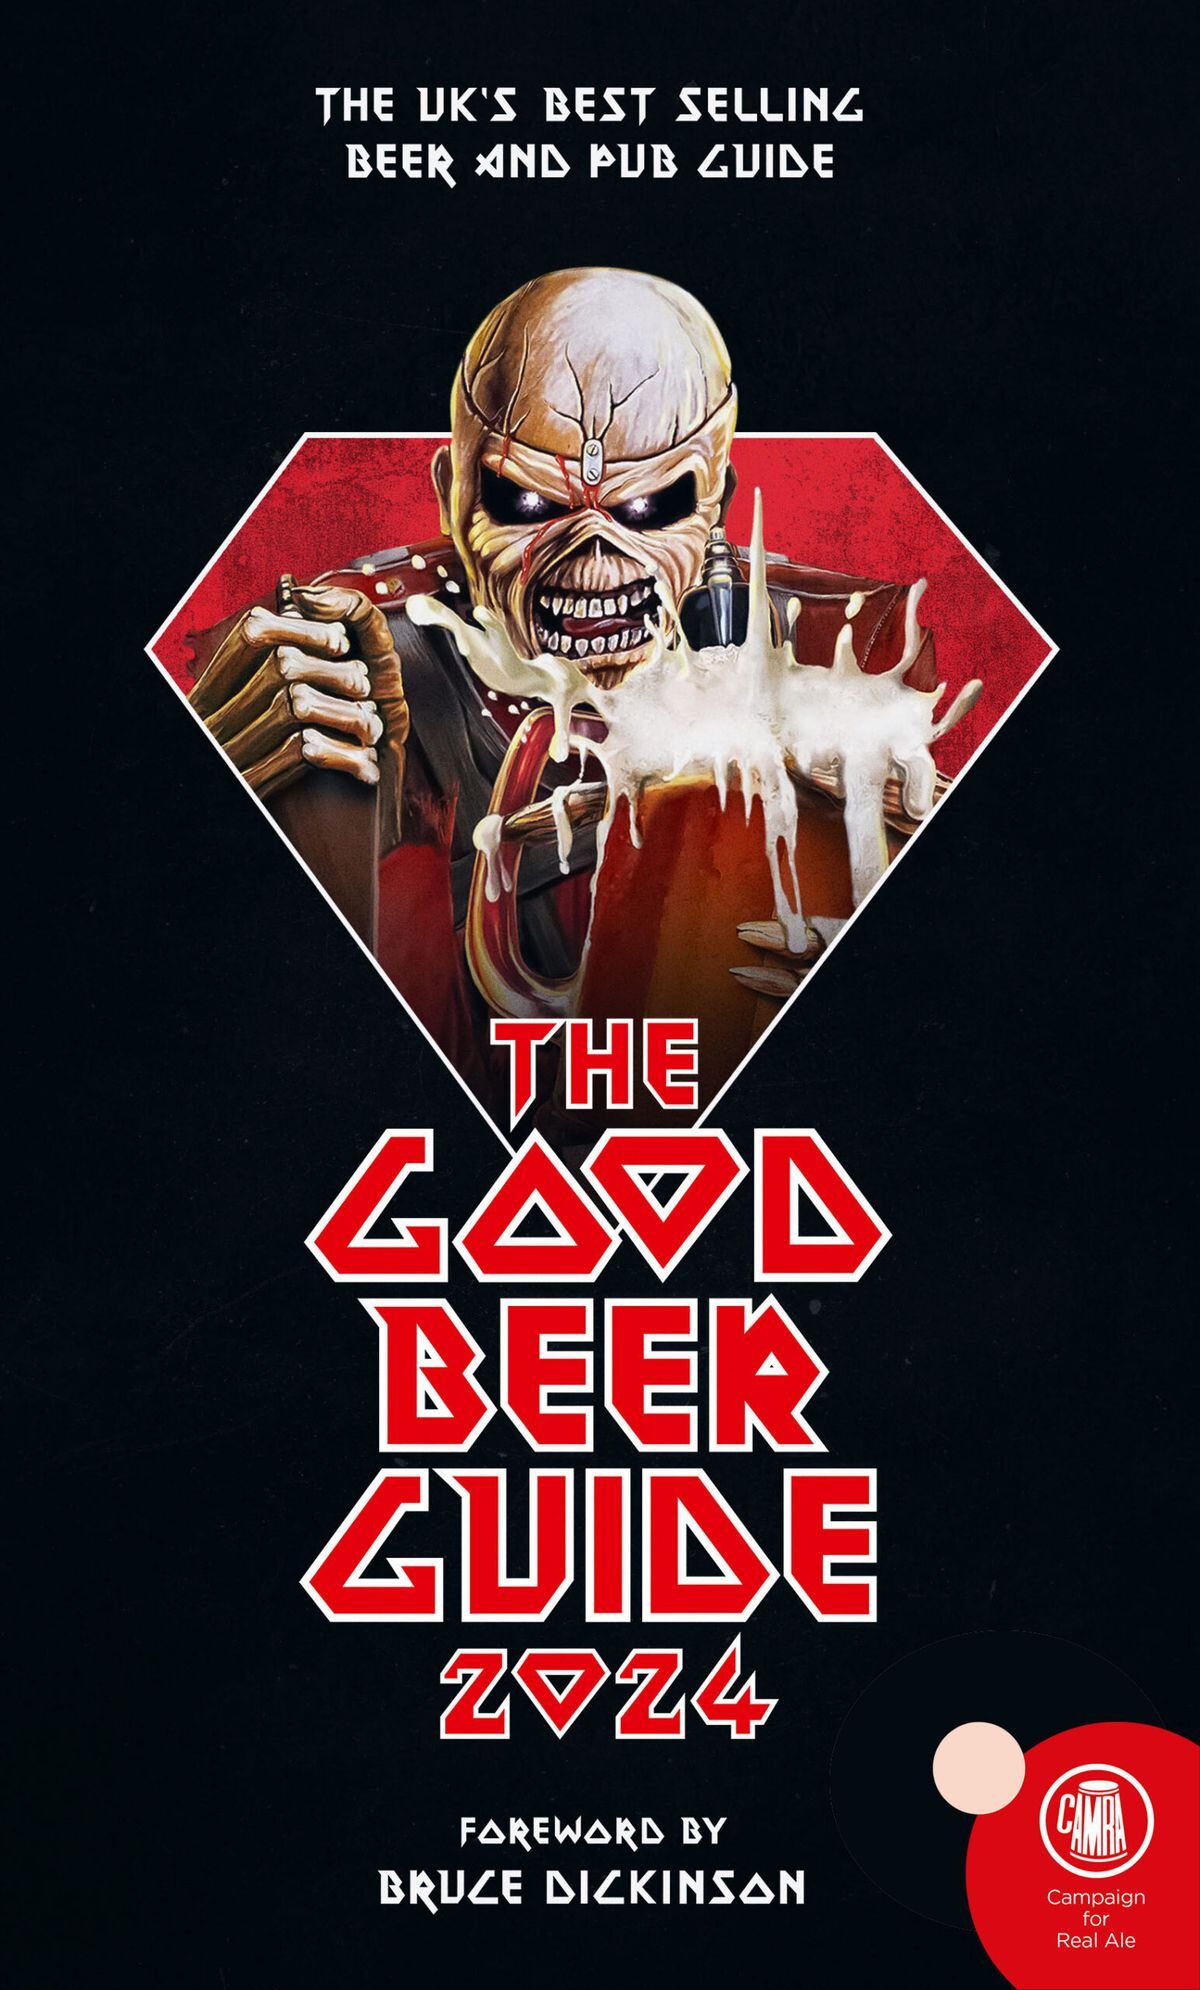 The 2024 Good Beer Guide cover inspired Bruce Dickinson of Iron Maiden who wrote the introduction,